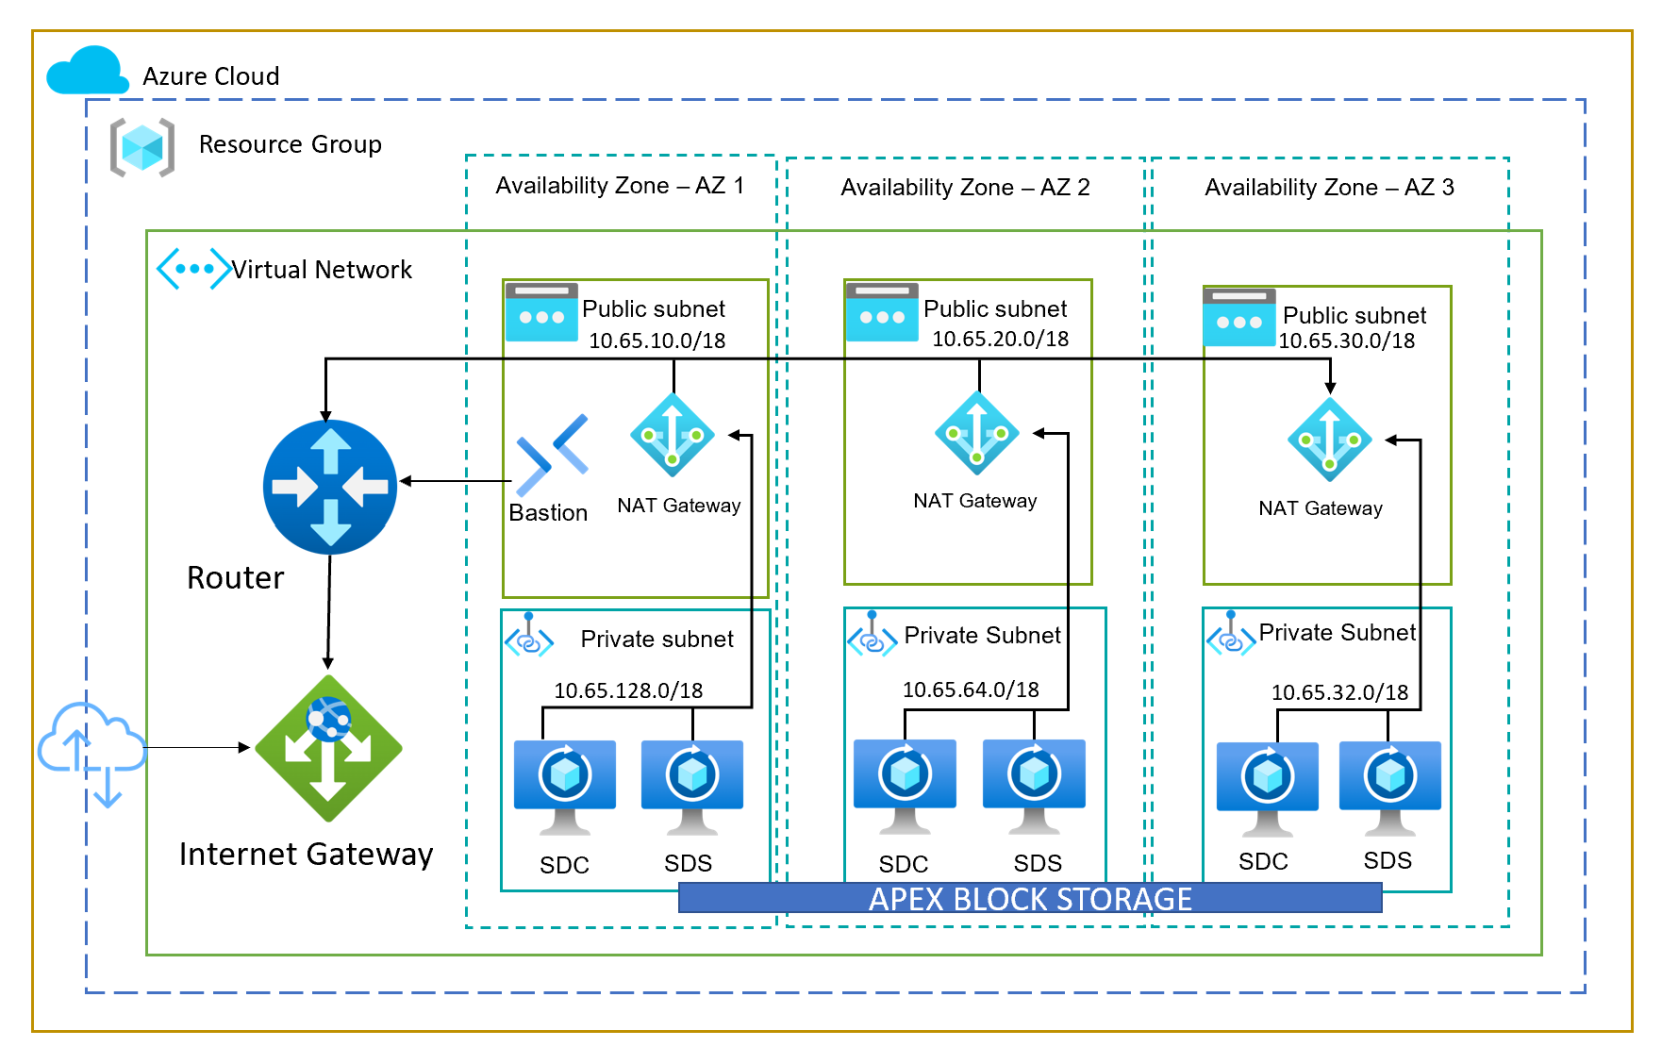 This figure shows the Dell APEX Block Storage network architecture in Azure.